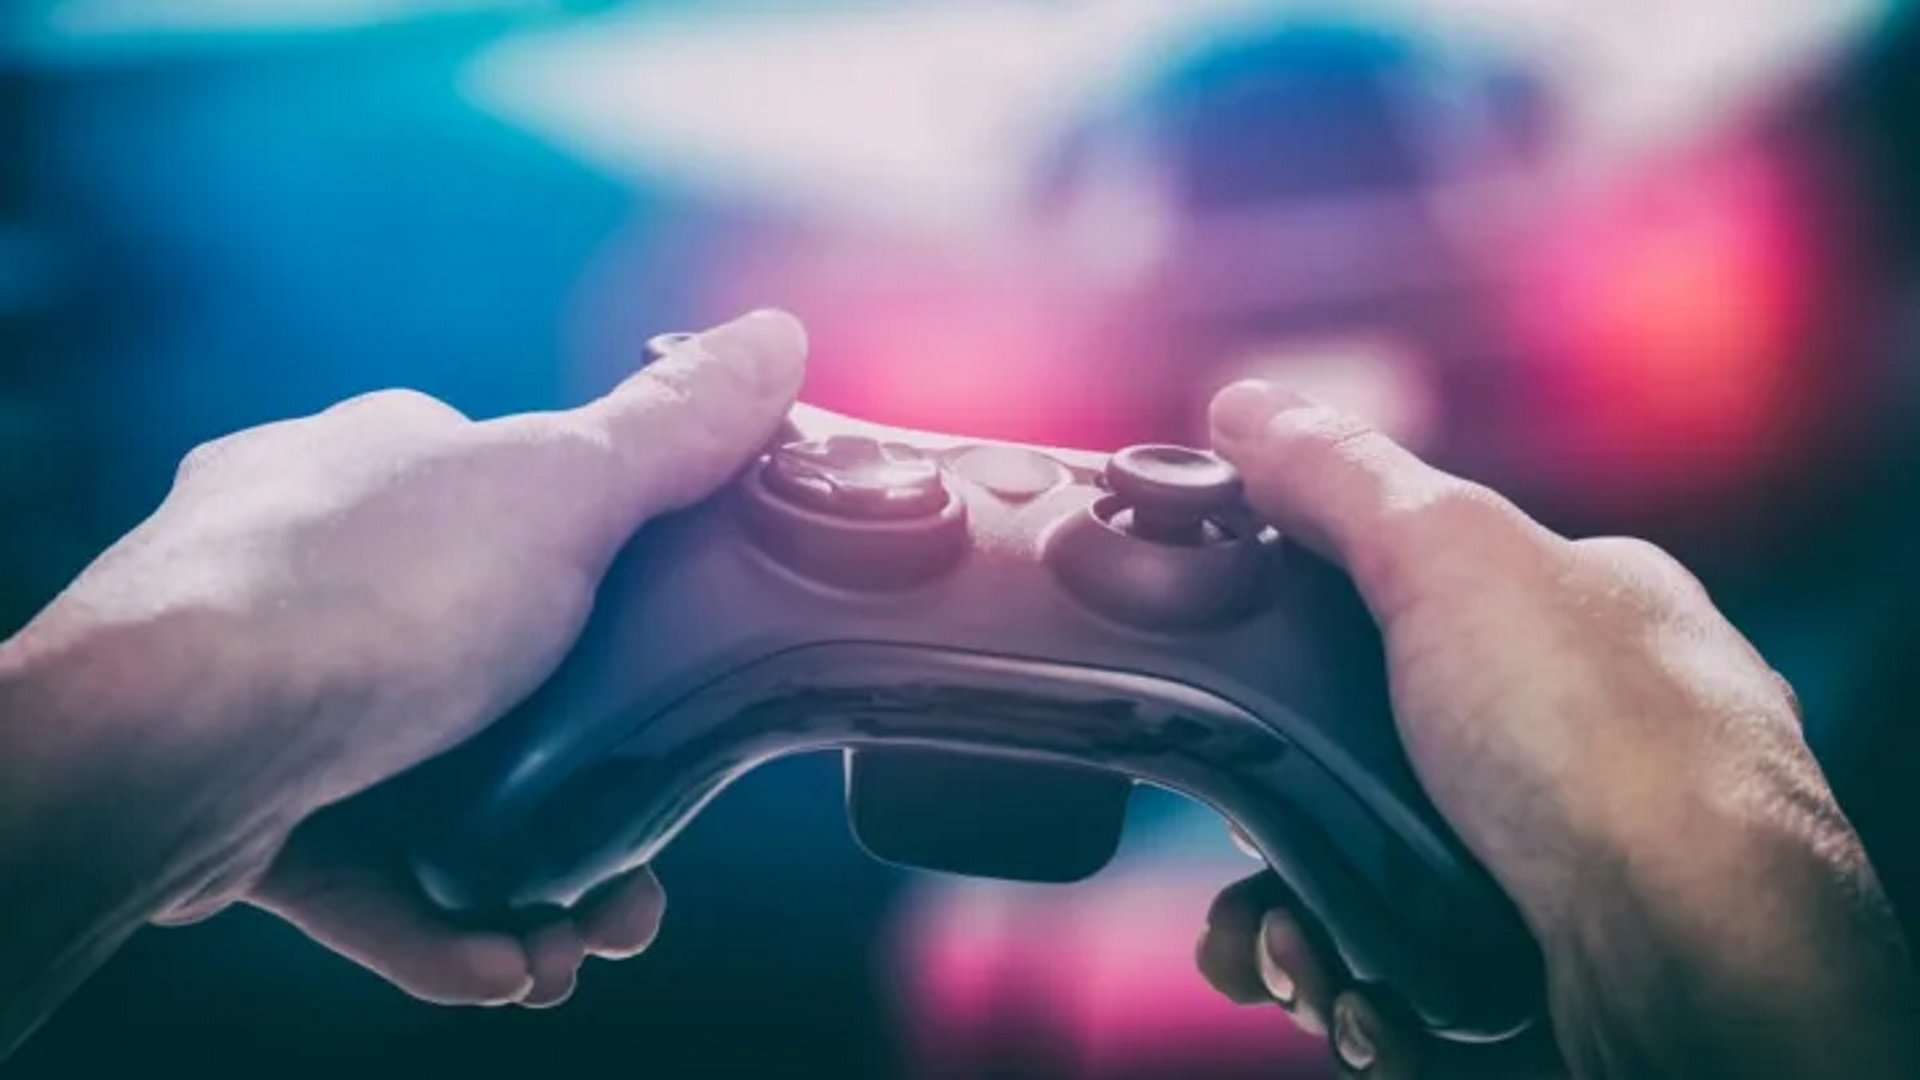 U.S. Homeland Security awards grant for preventing extremism in games